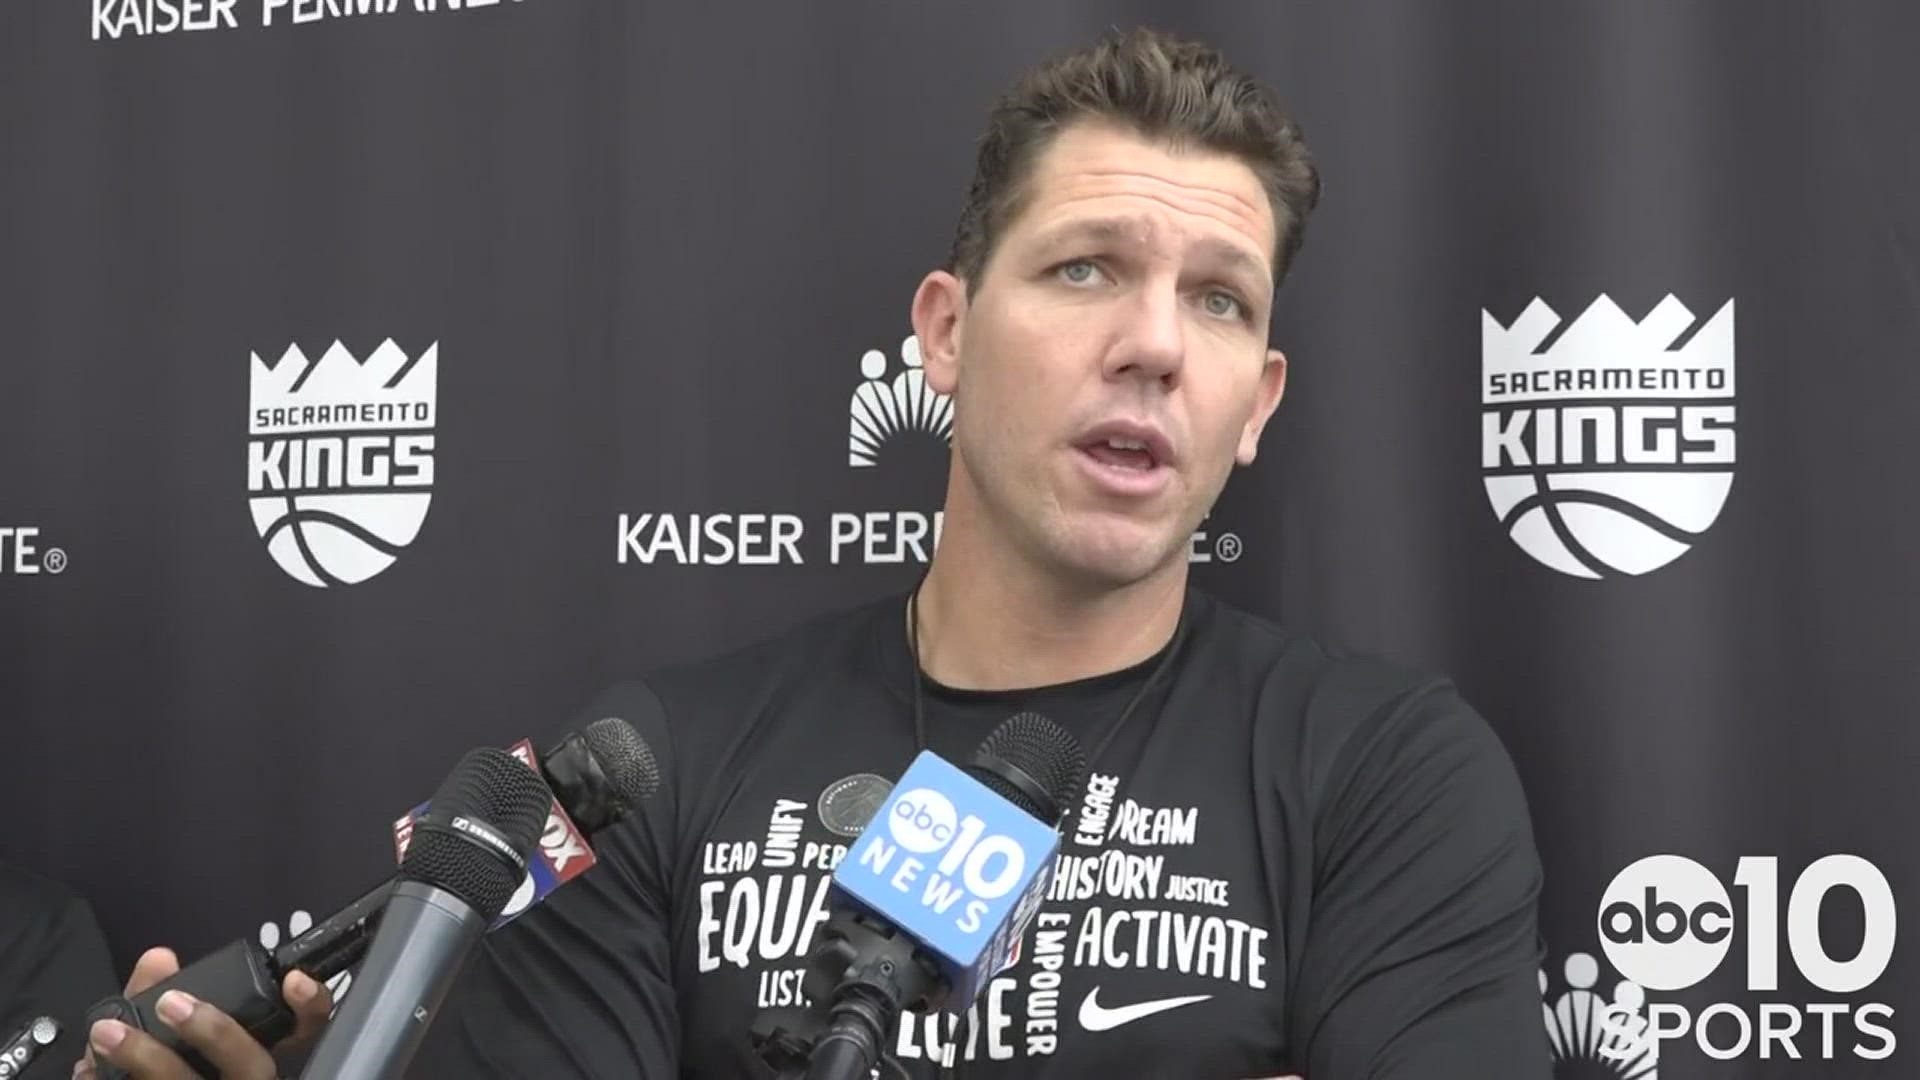 Kings' coach Luke Walton on the season opening thriller in Portland, escaping with a victory over the Trail Blazers and looking forward to Friday's home opener.